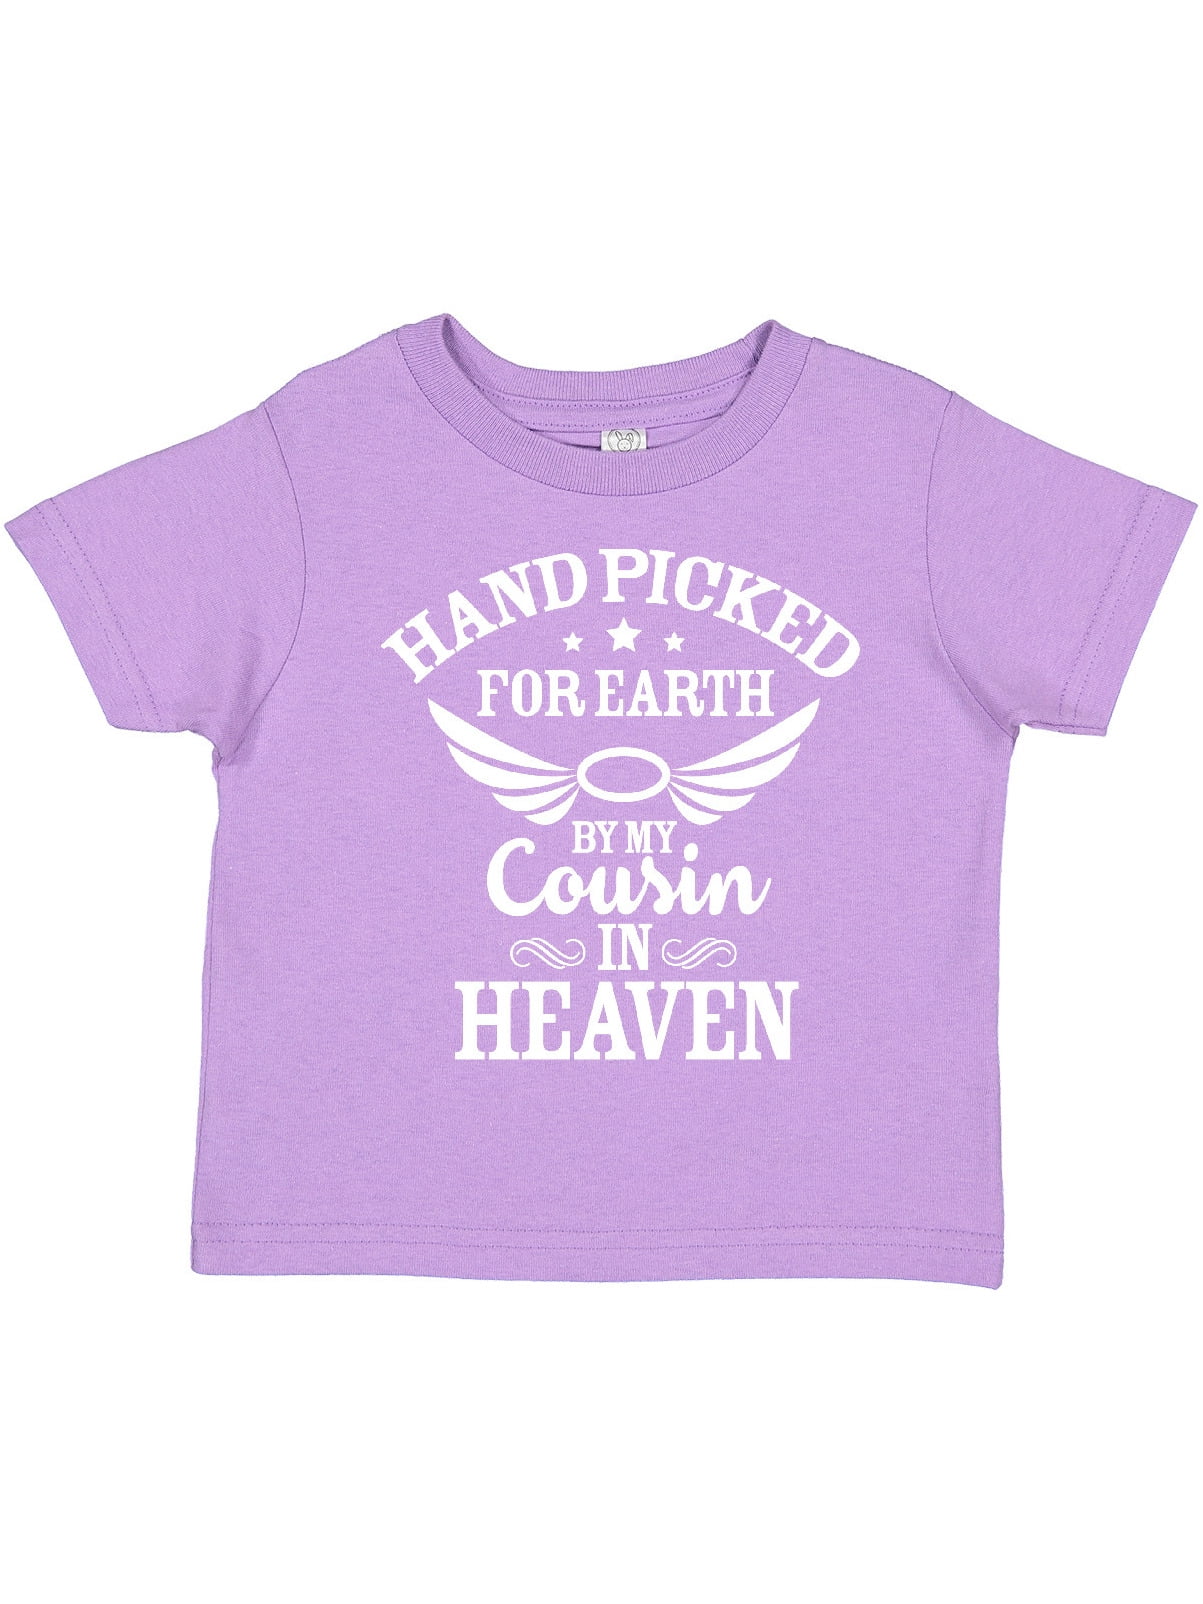 Toddler/Kids Short Sleeve T-Shirt My Great-Aunt in Heaven Loves Me